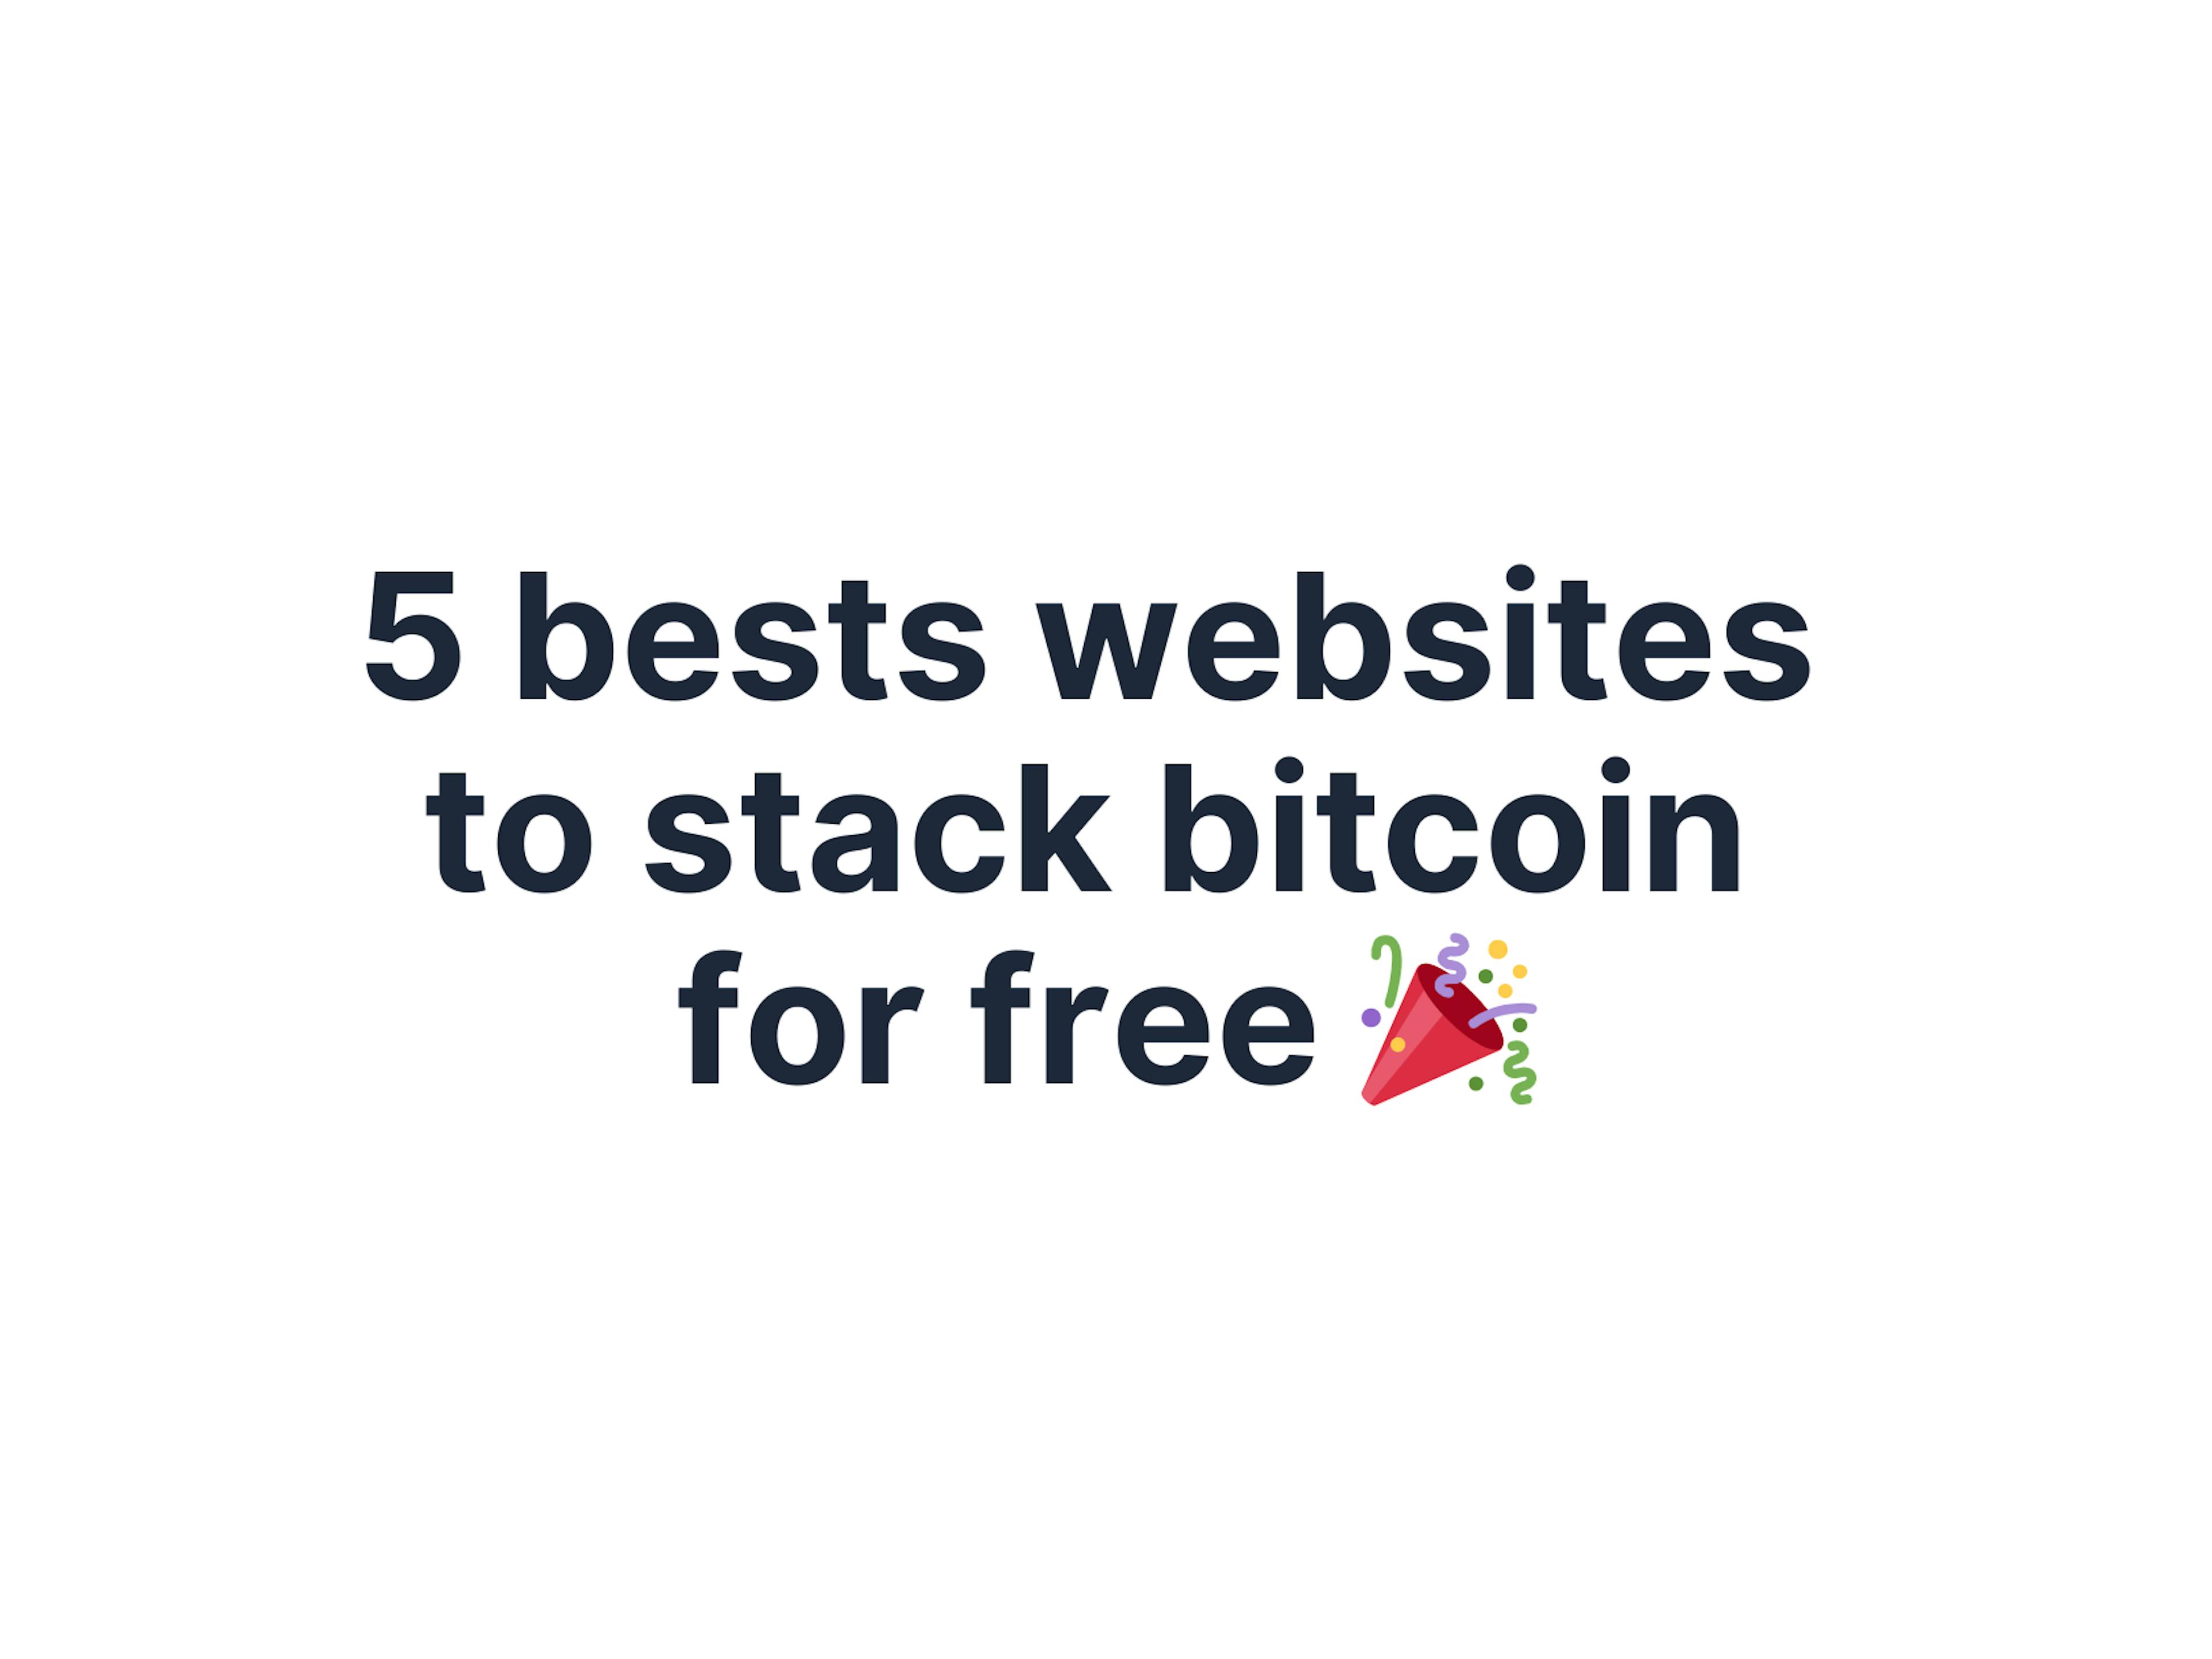 5 bests websites to stack bitcoin for free